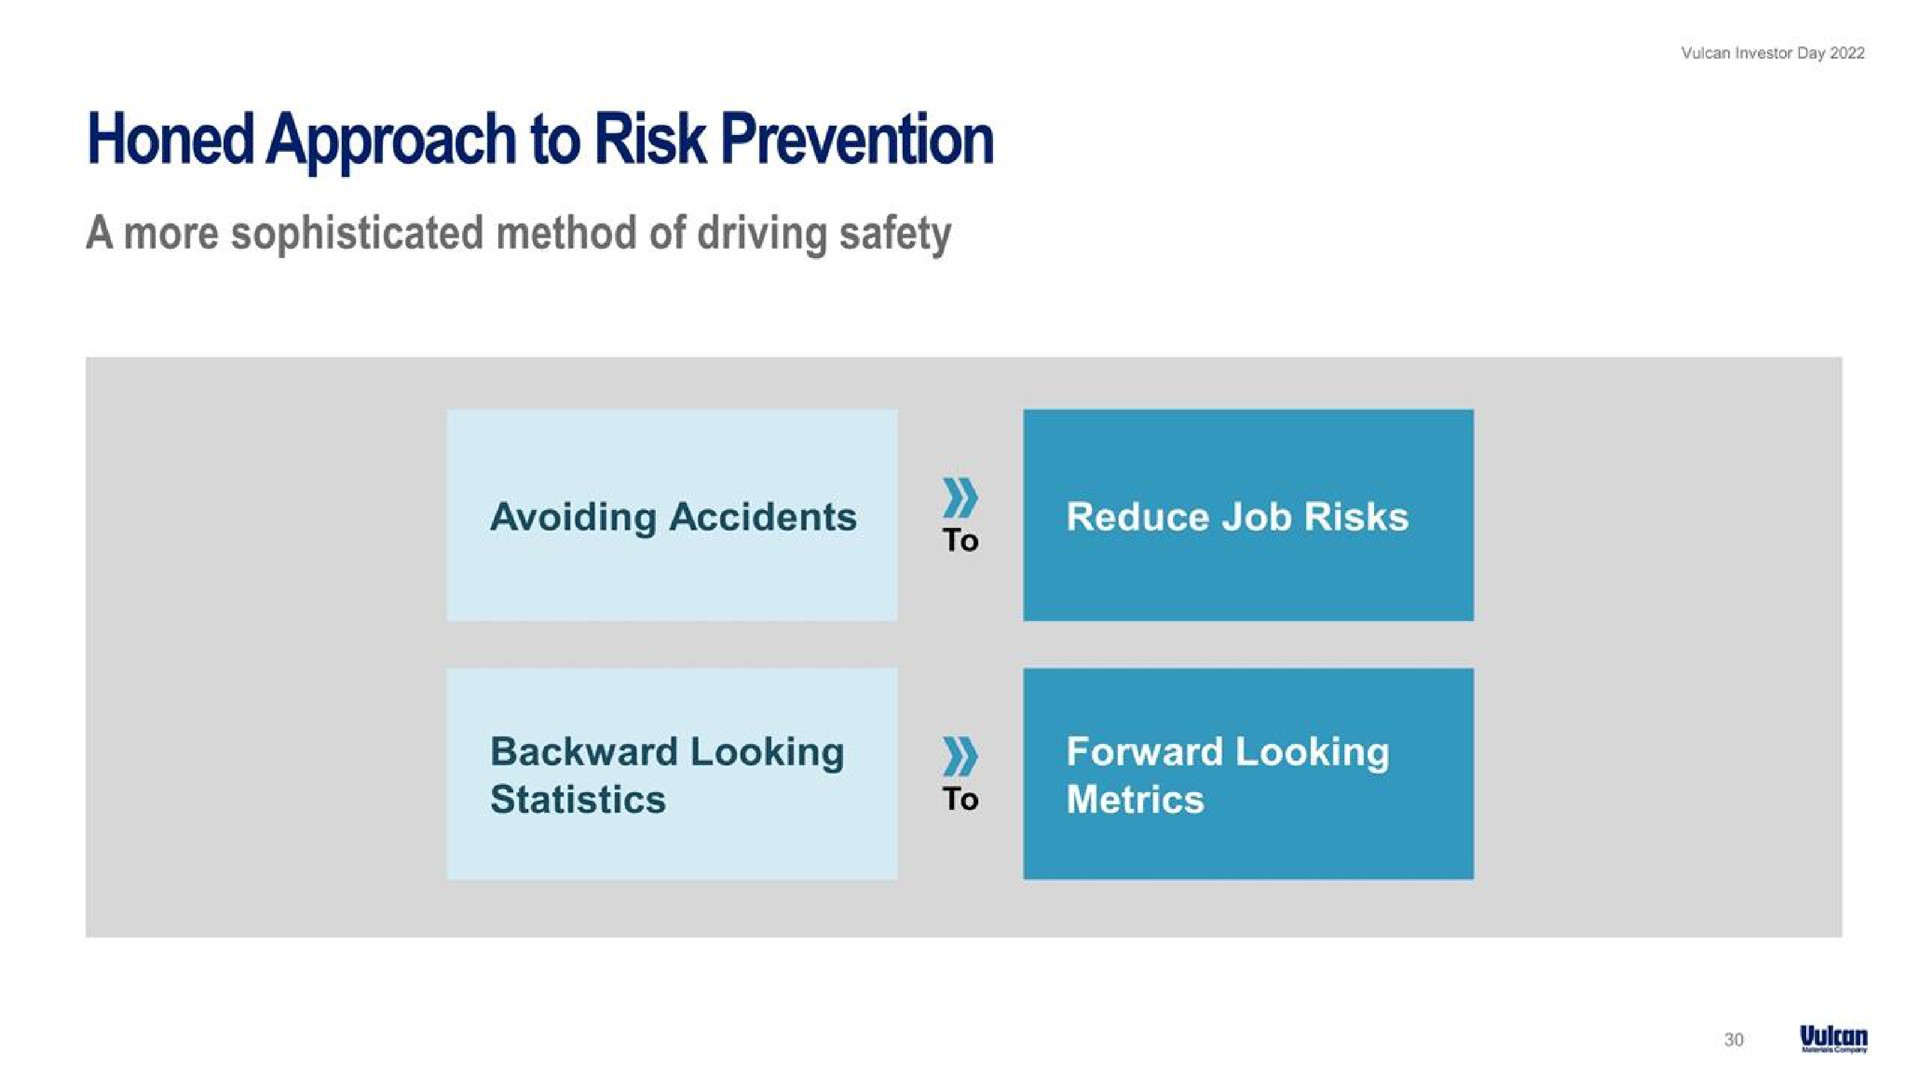 honed approach to risk prevention | Vulcan Materials